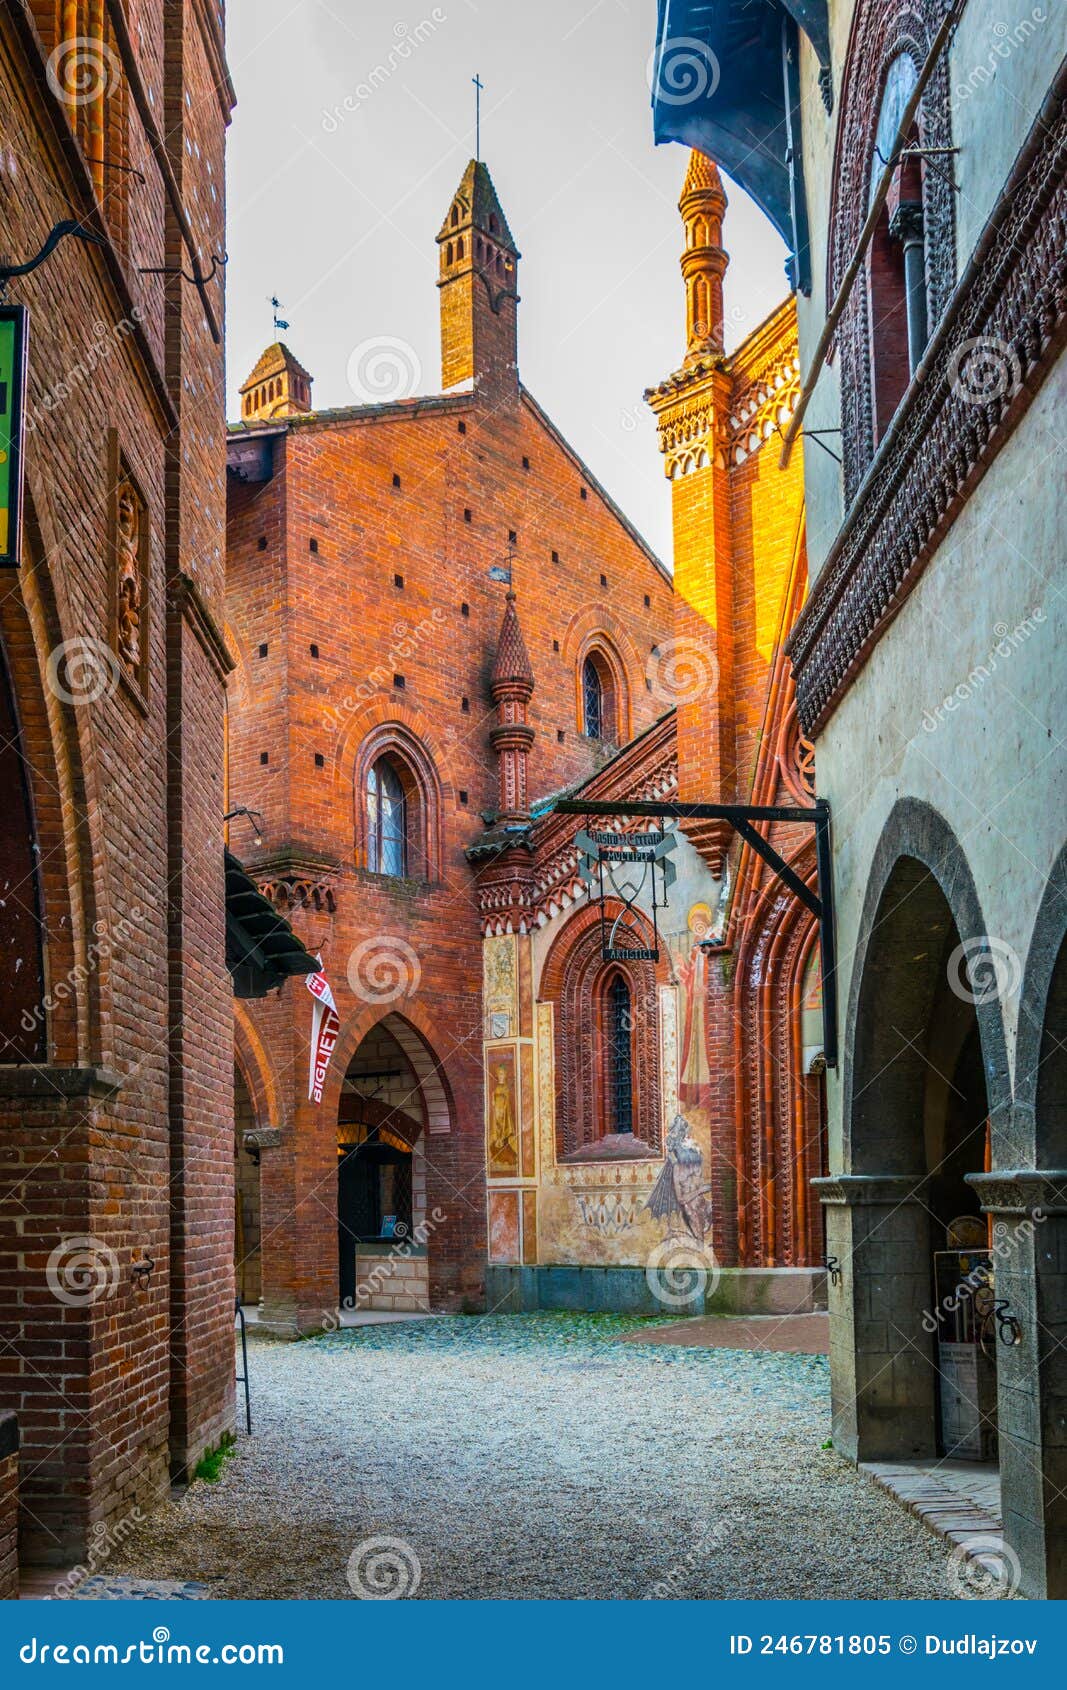 view of borgo medievale castle looking buidling in the italian city torino...image